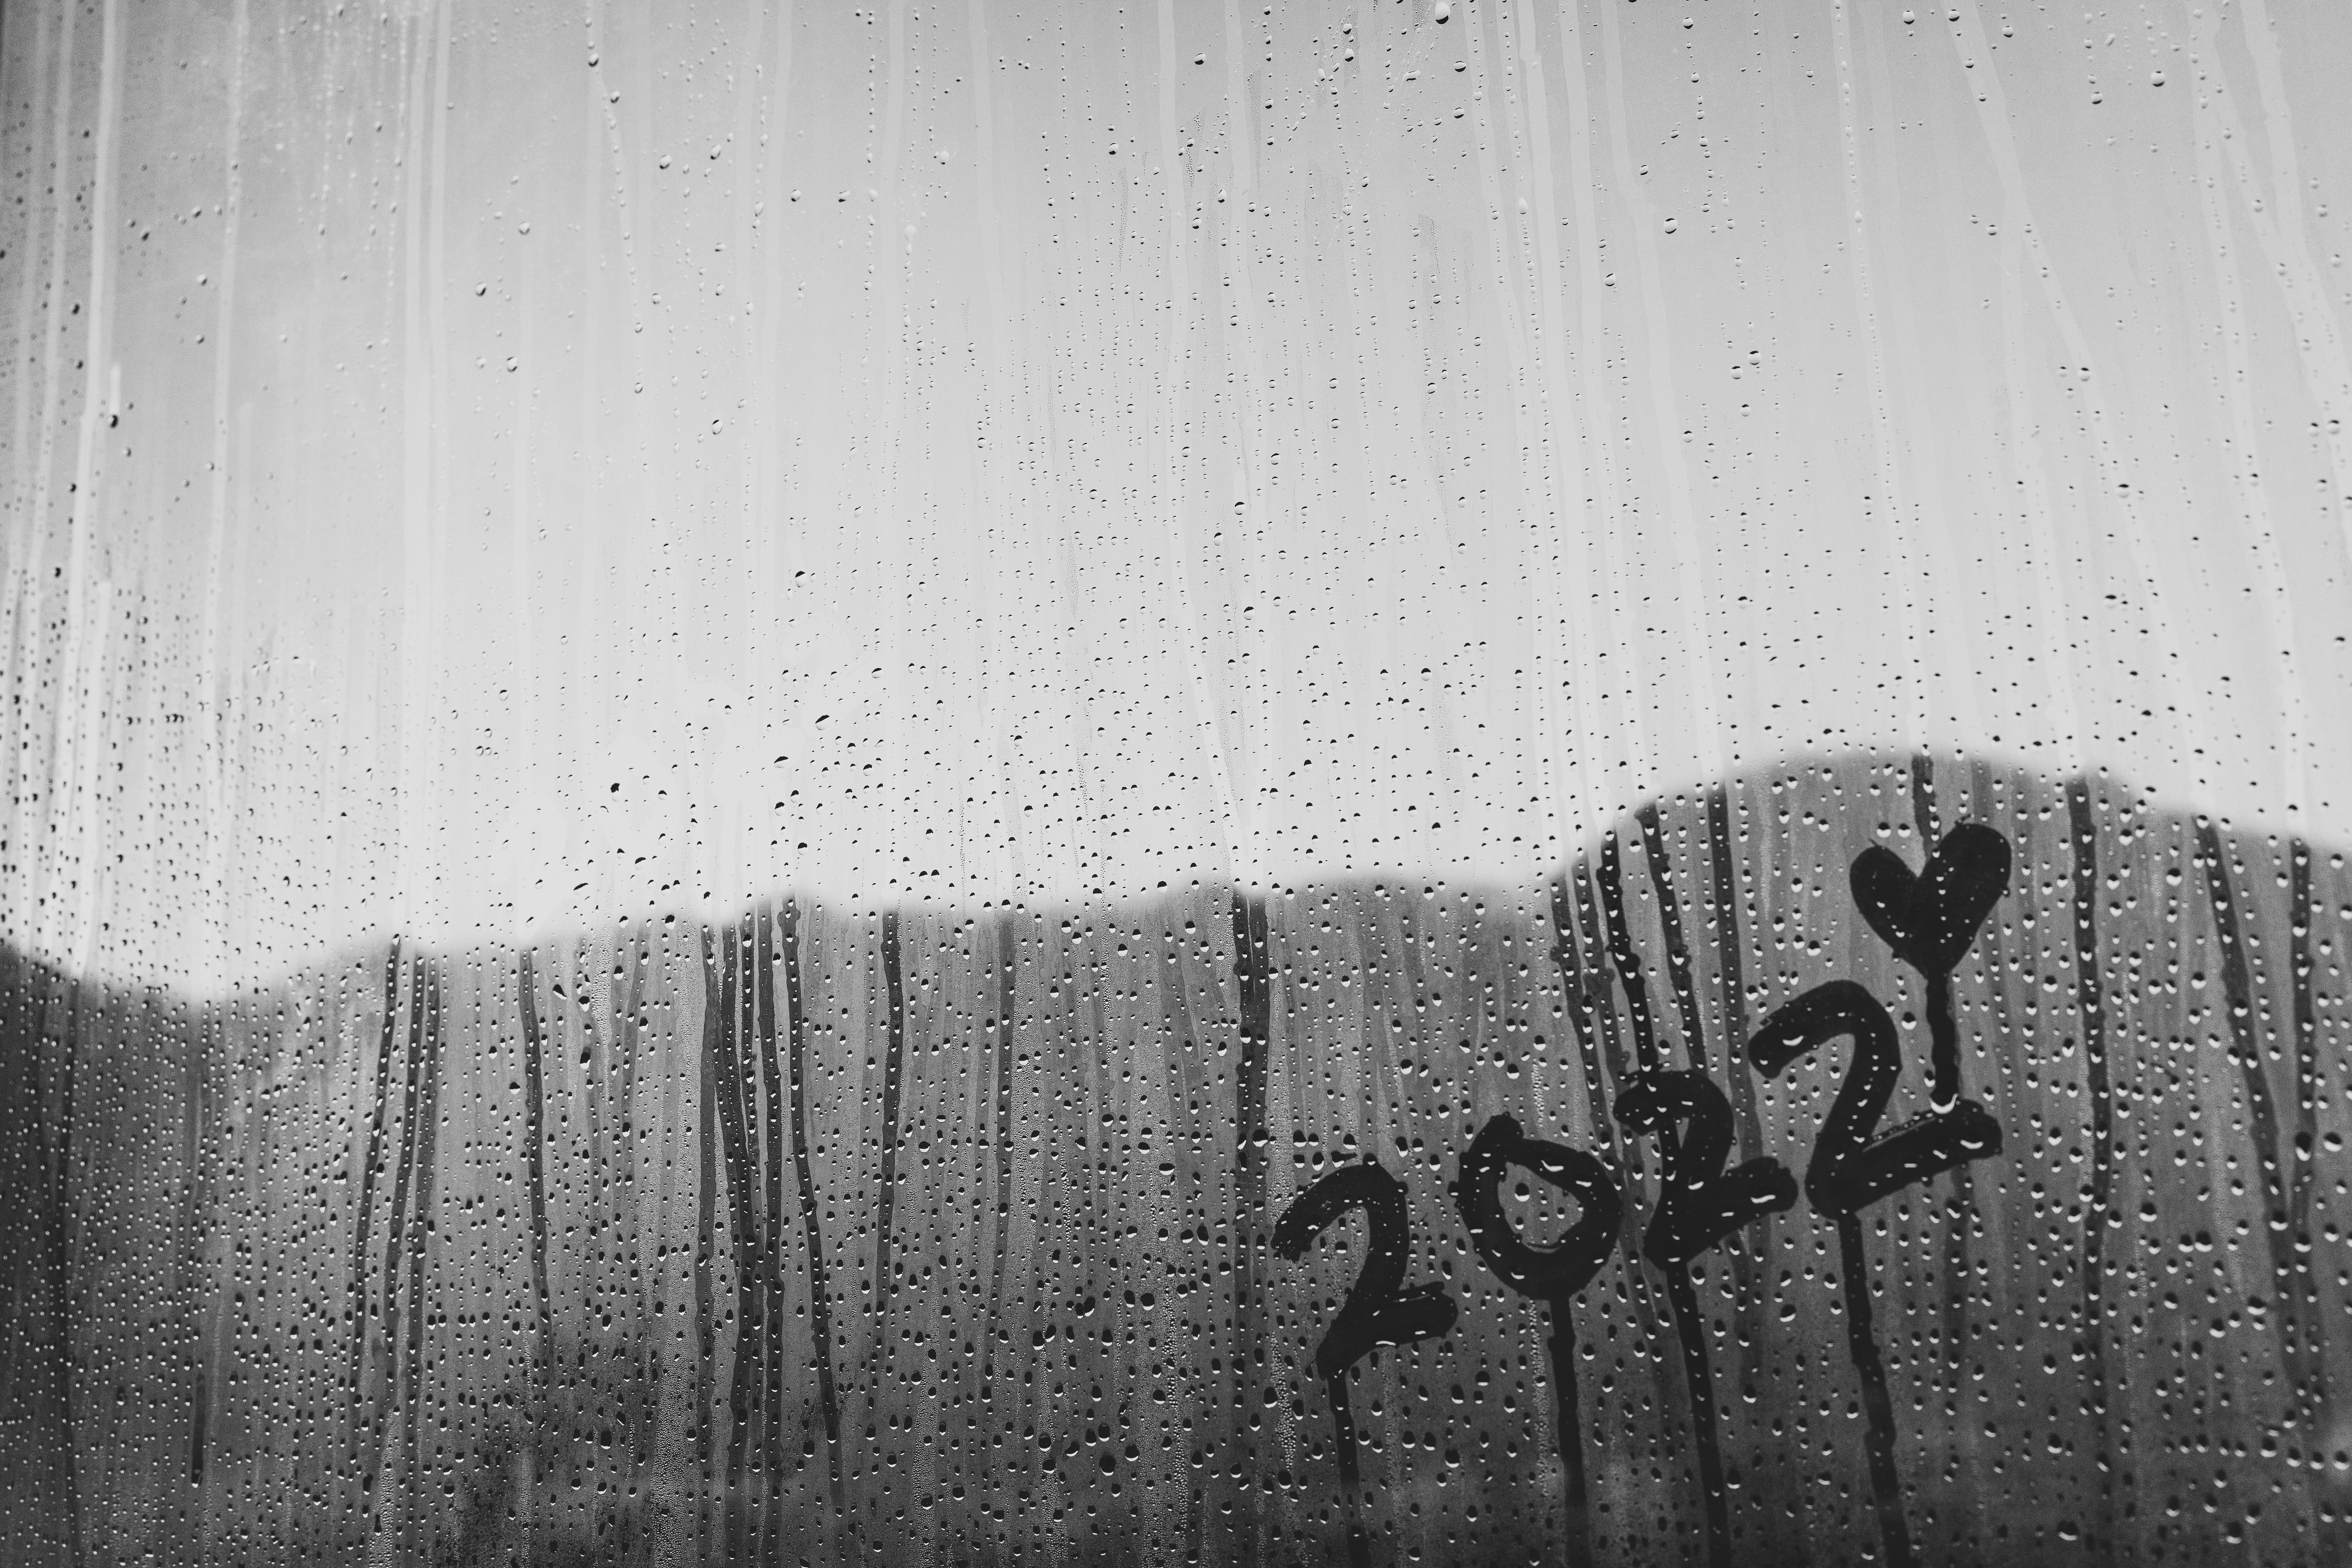 fog on window with 2022 and heart drawn in the fog